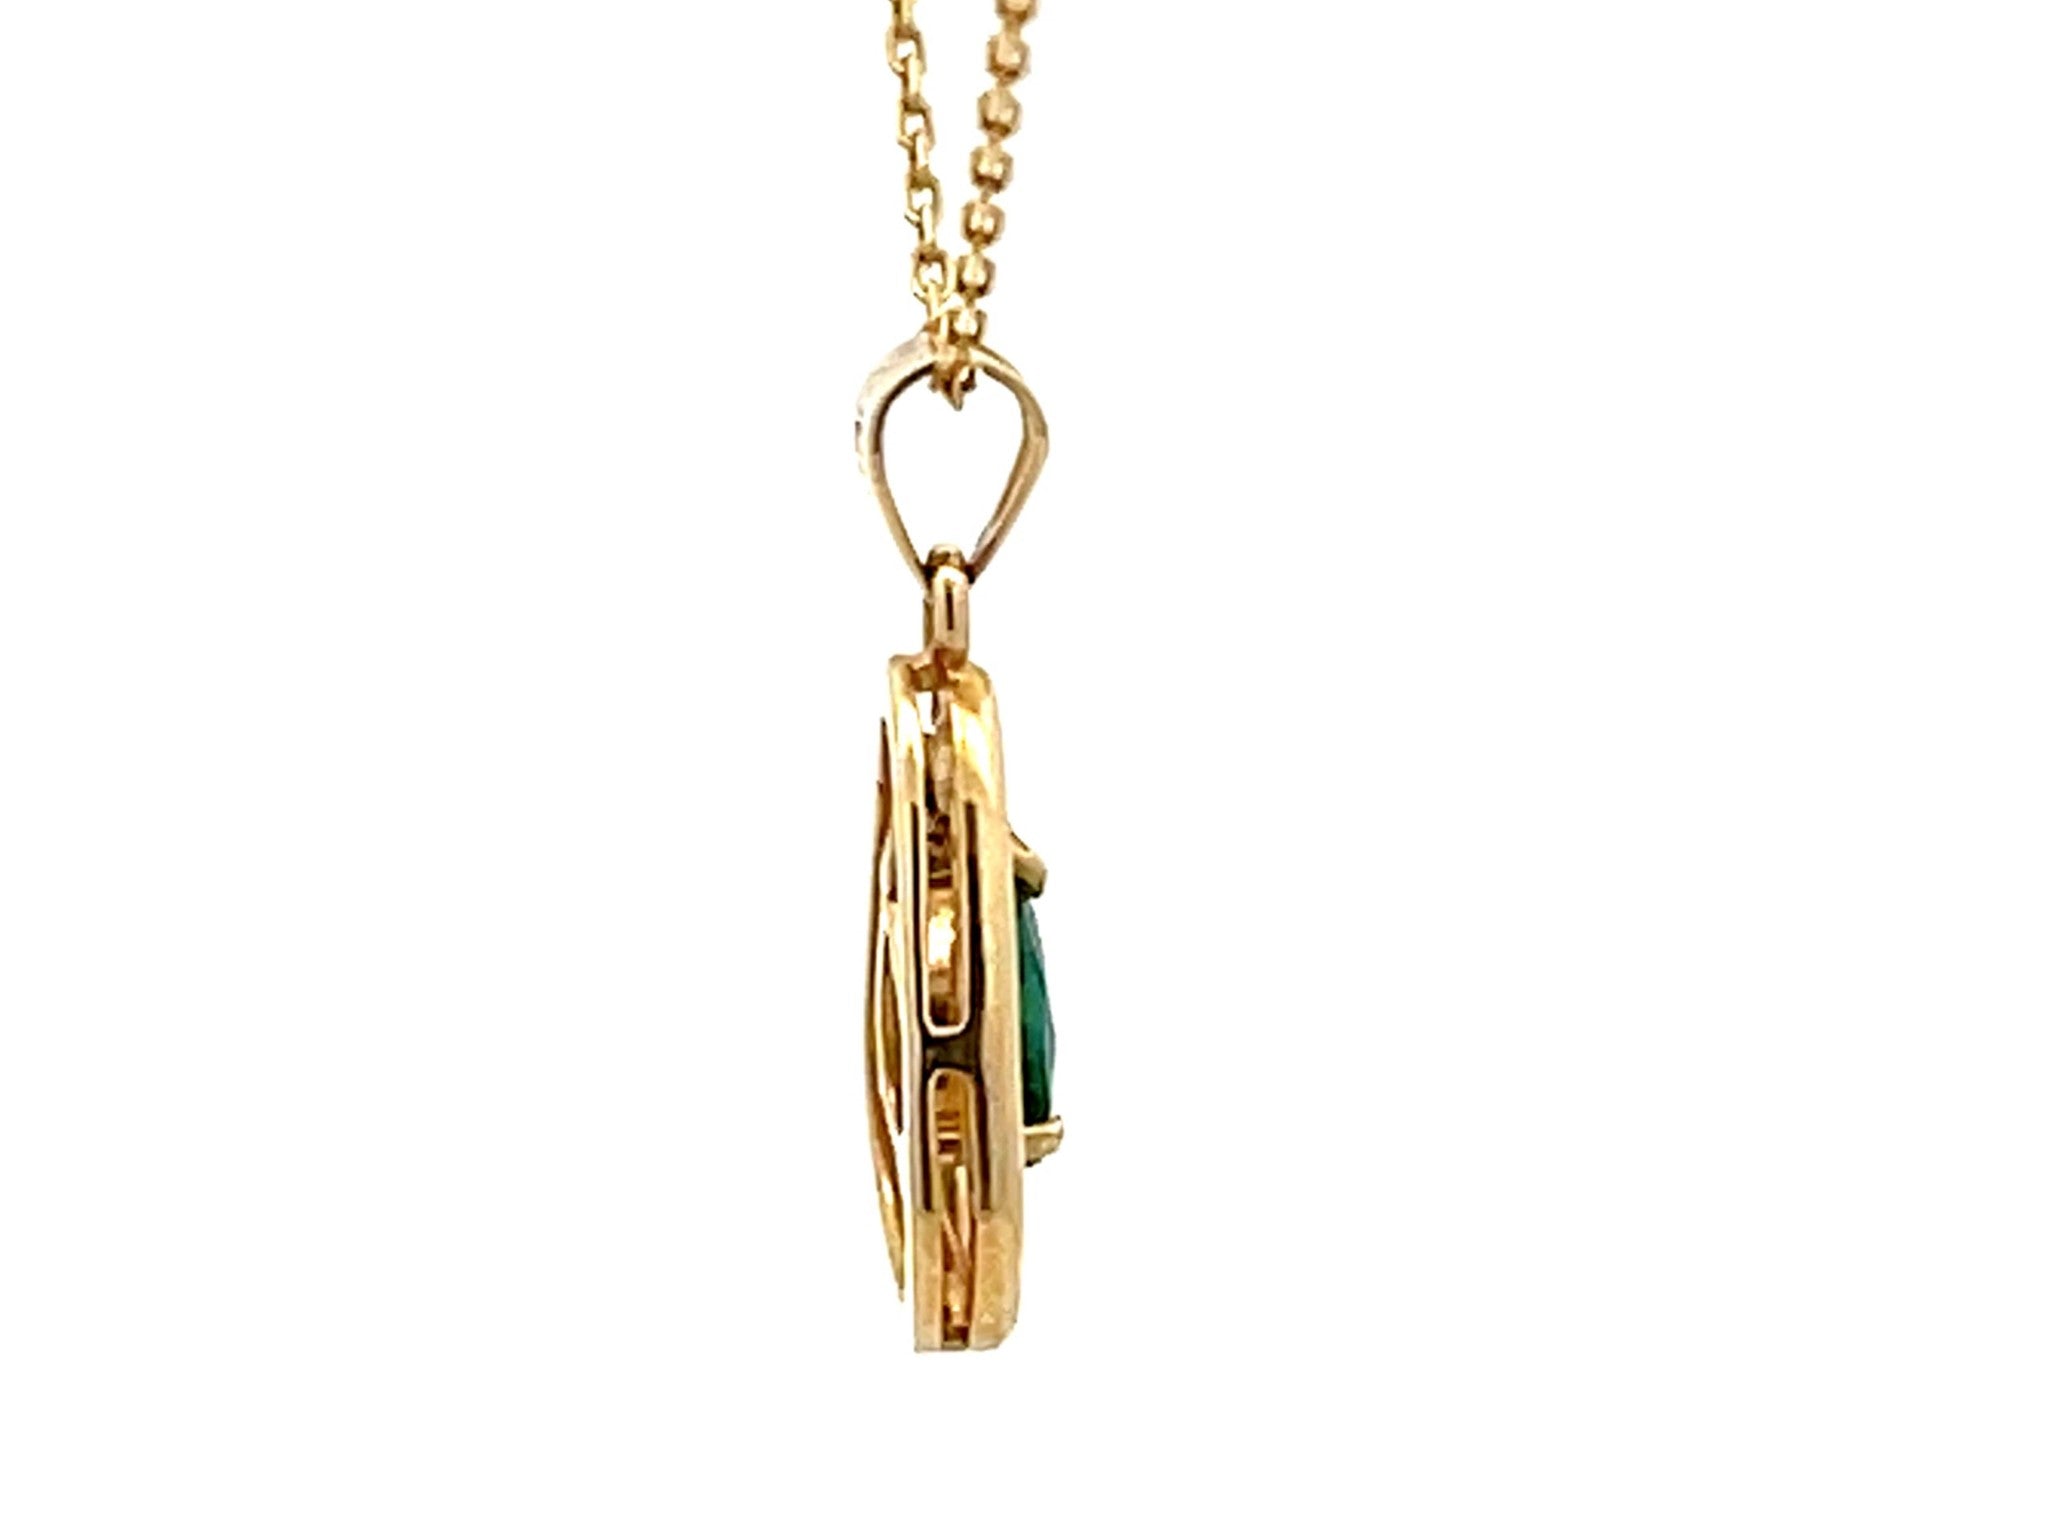 Dangly Pear Shaped Emerald Necklace 14K Yellow Gold